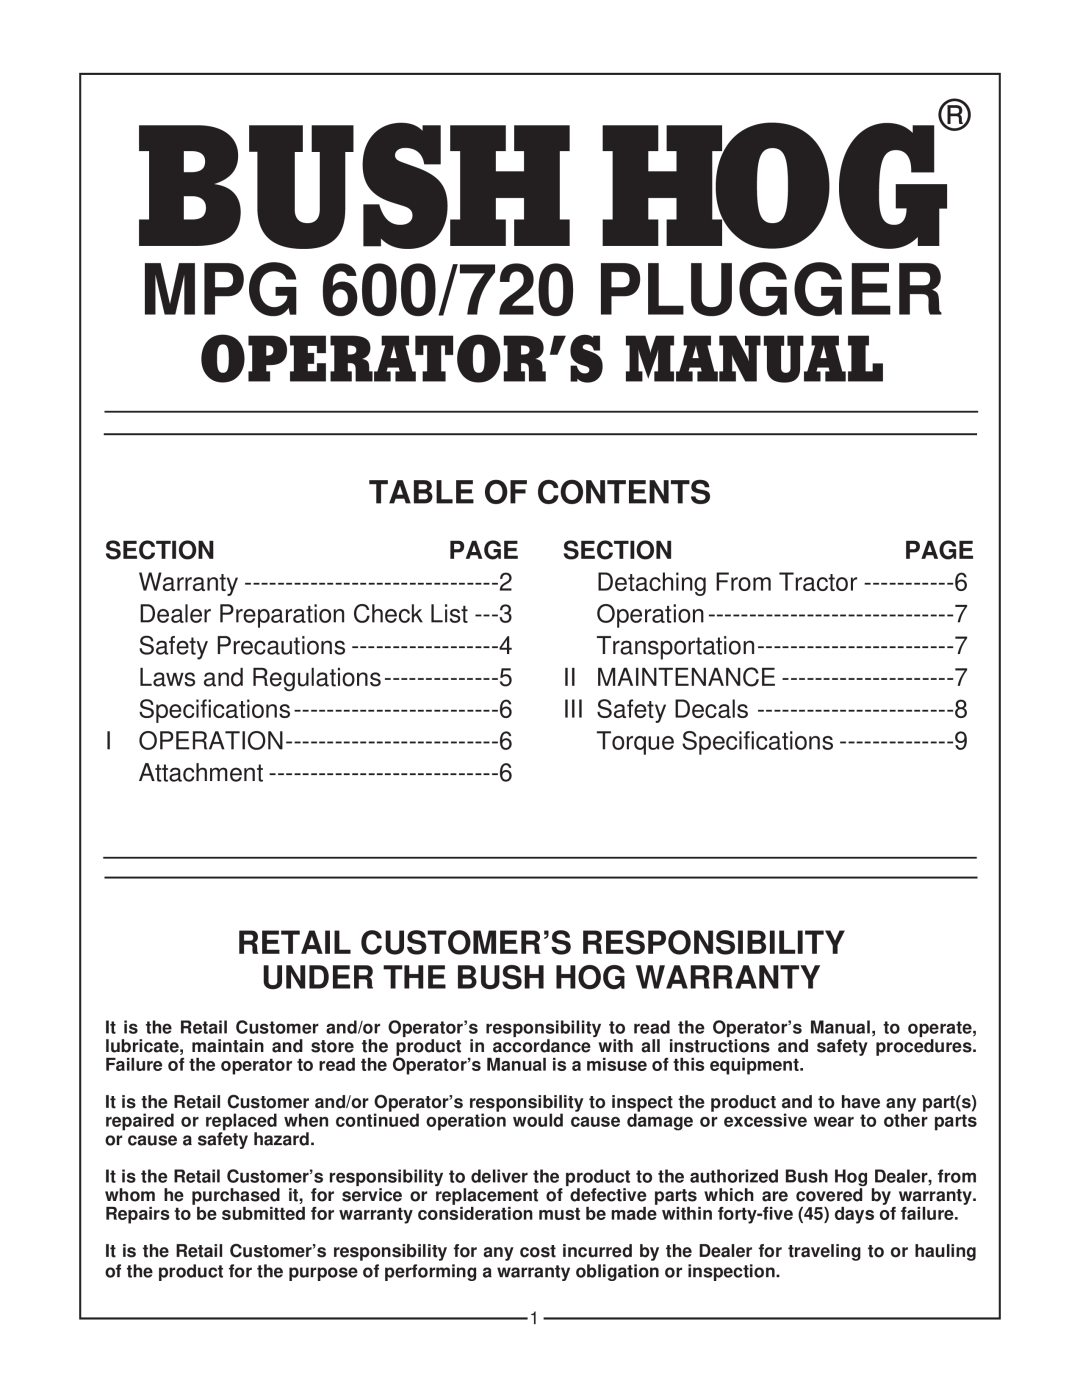 Bush Hog 720 Table Of Contents, Retail Customer’S Responsibility Under The Bush Hog Warranty, Section, Page, I Operation 